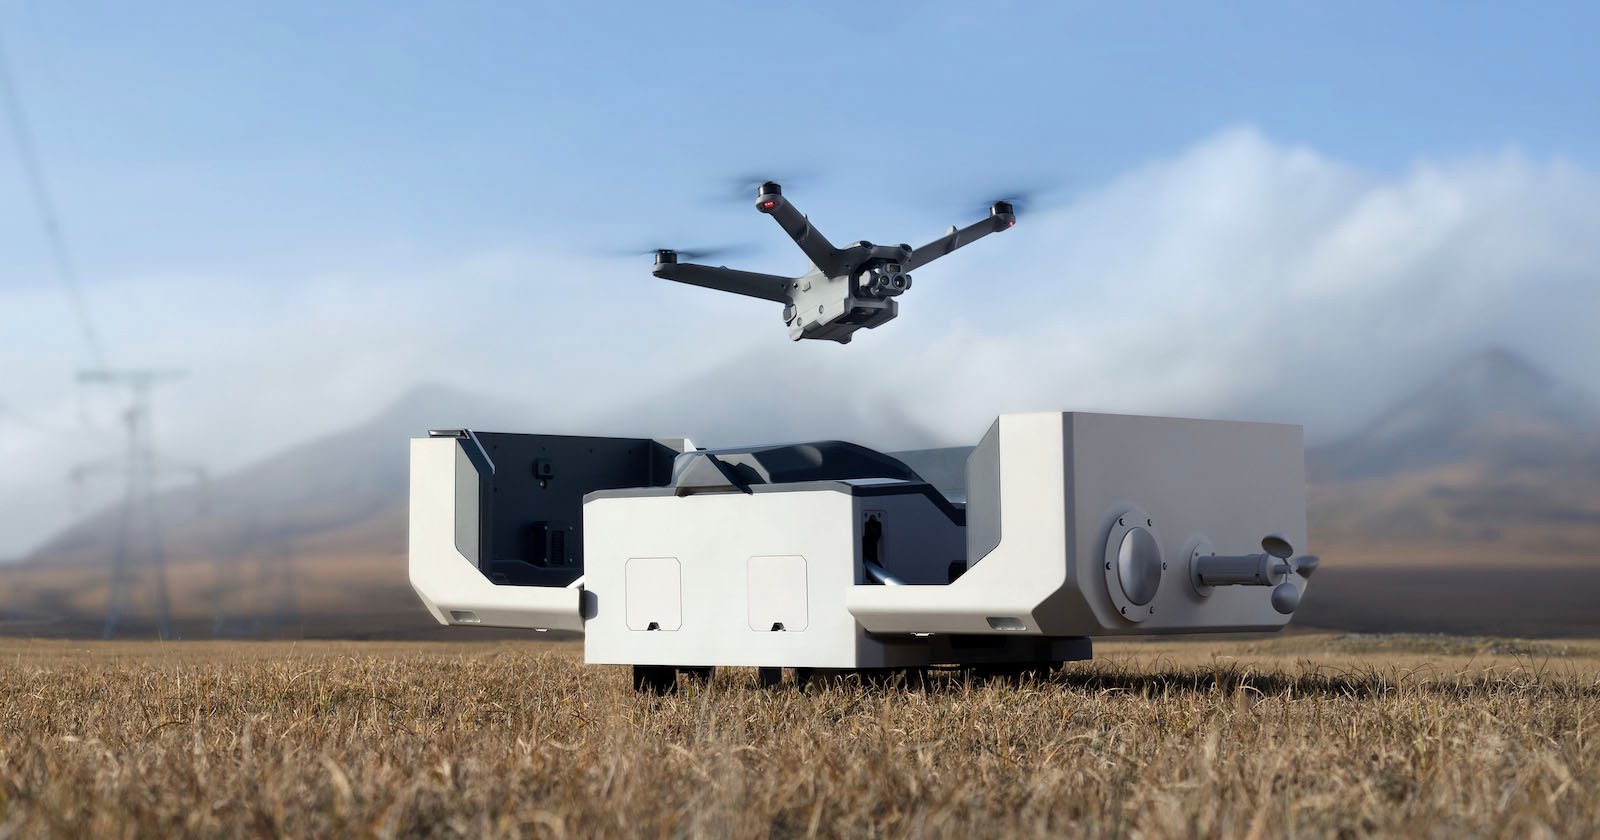 DJIs Automatic Drone in a Box Flies and Photographs for 6 Months